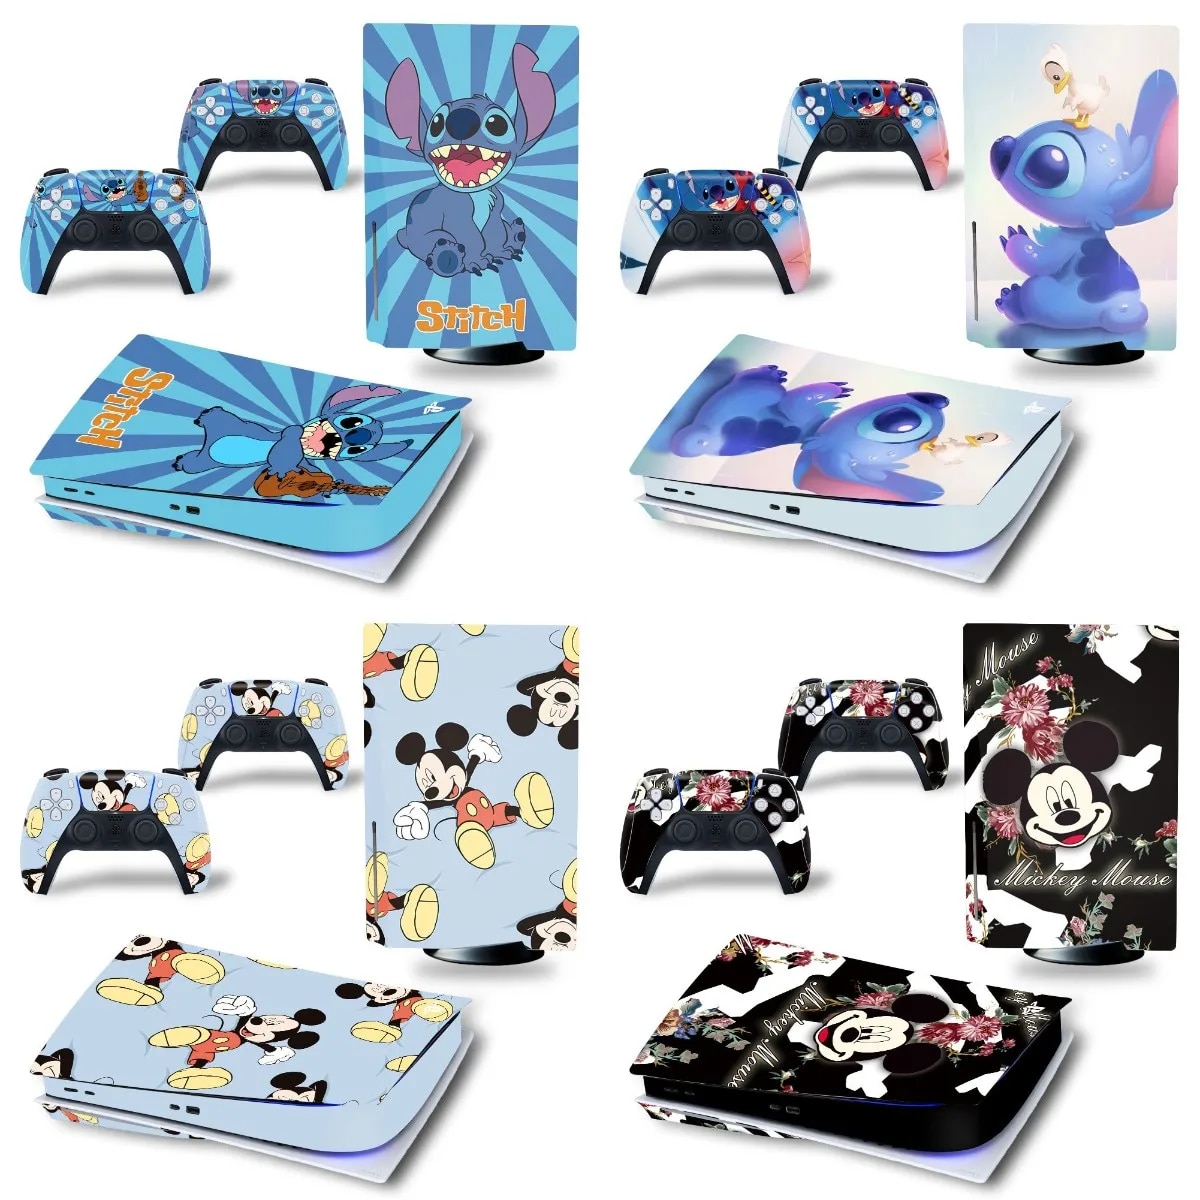 【Shop the Look】 Mickey Stitch Ps5 Disk Edition Skin Sticker Decal Cover For Playstation5 Disc Console 2 Controllers Skin Sticker Vinyl